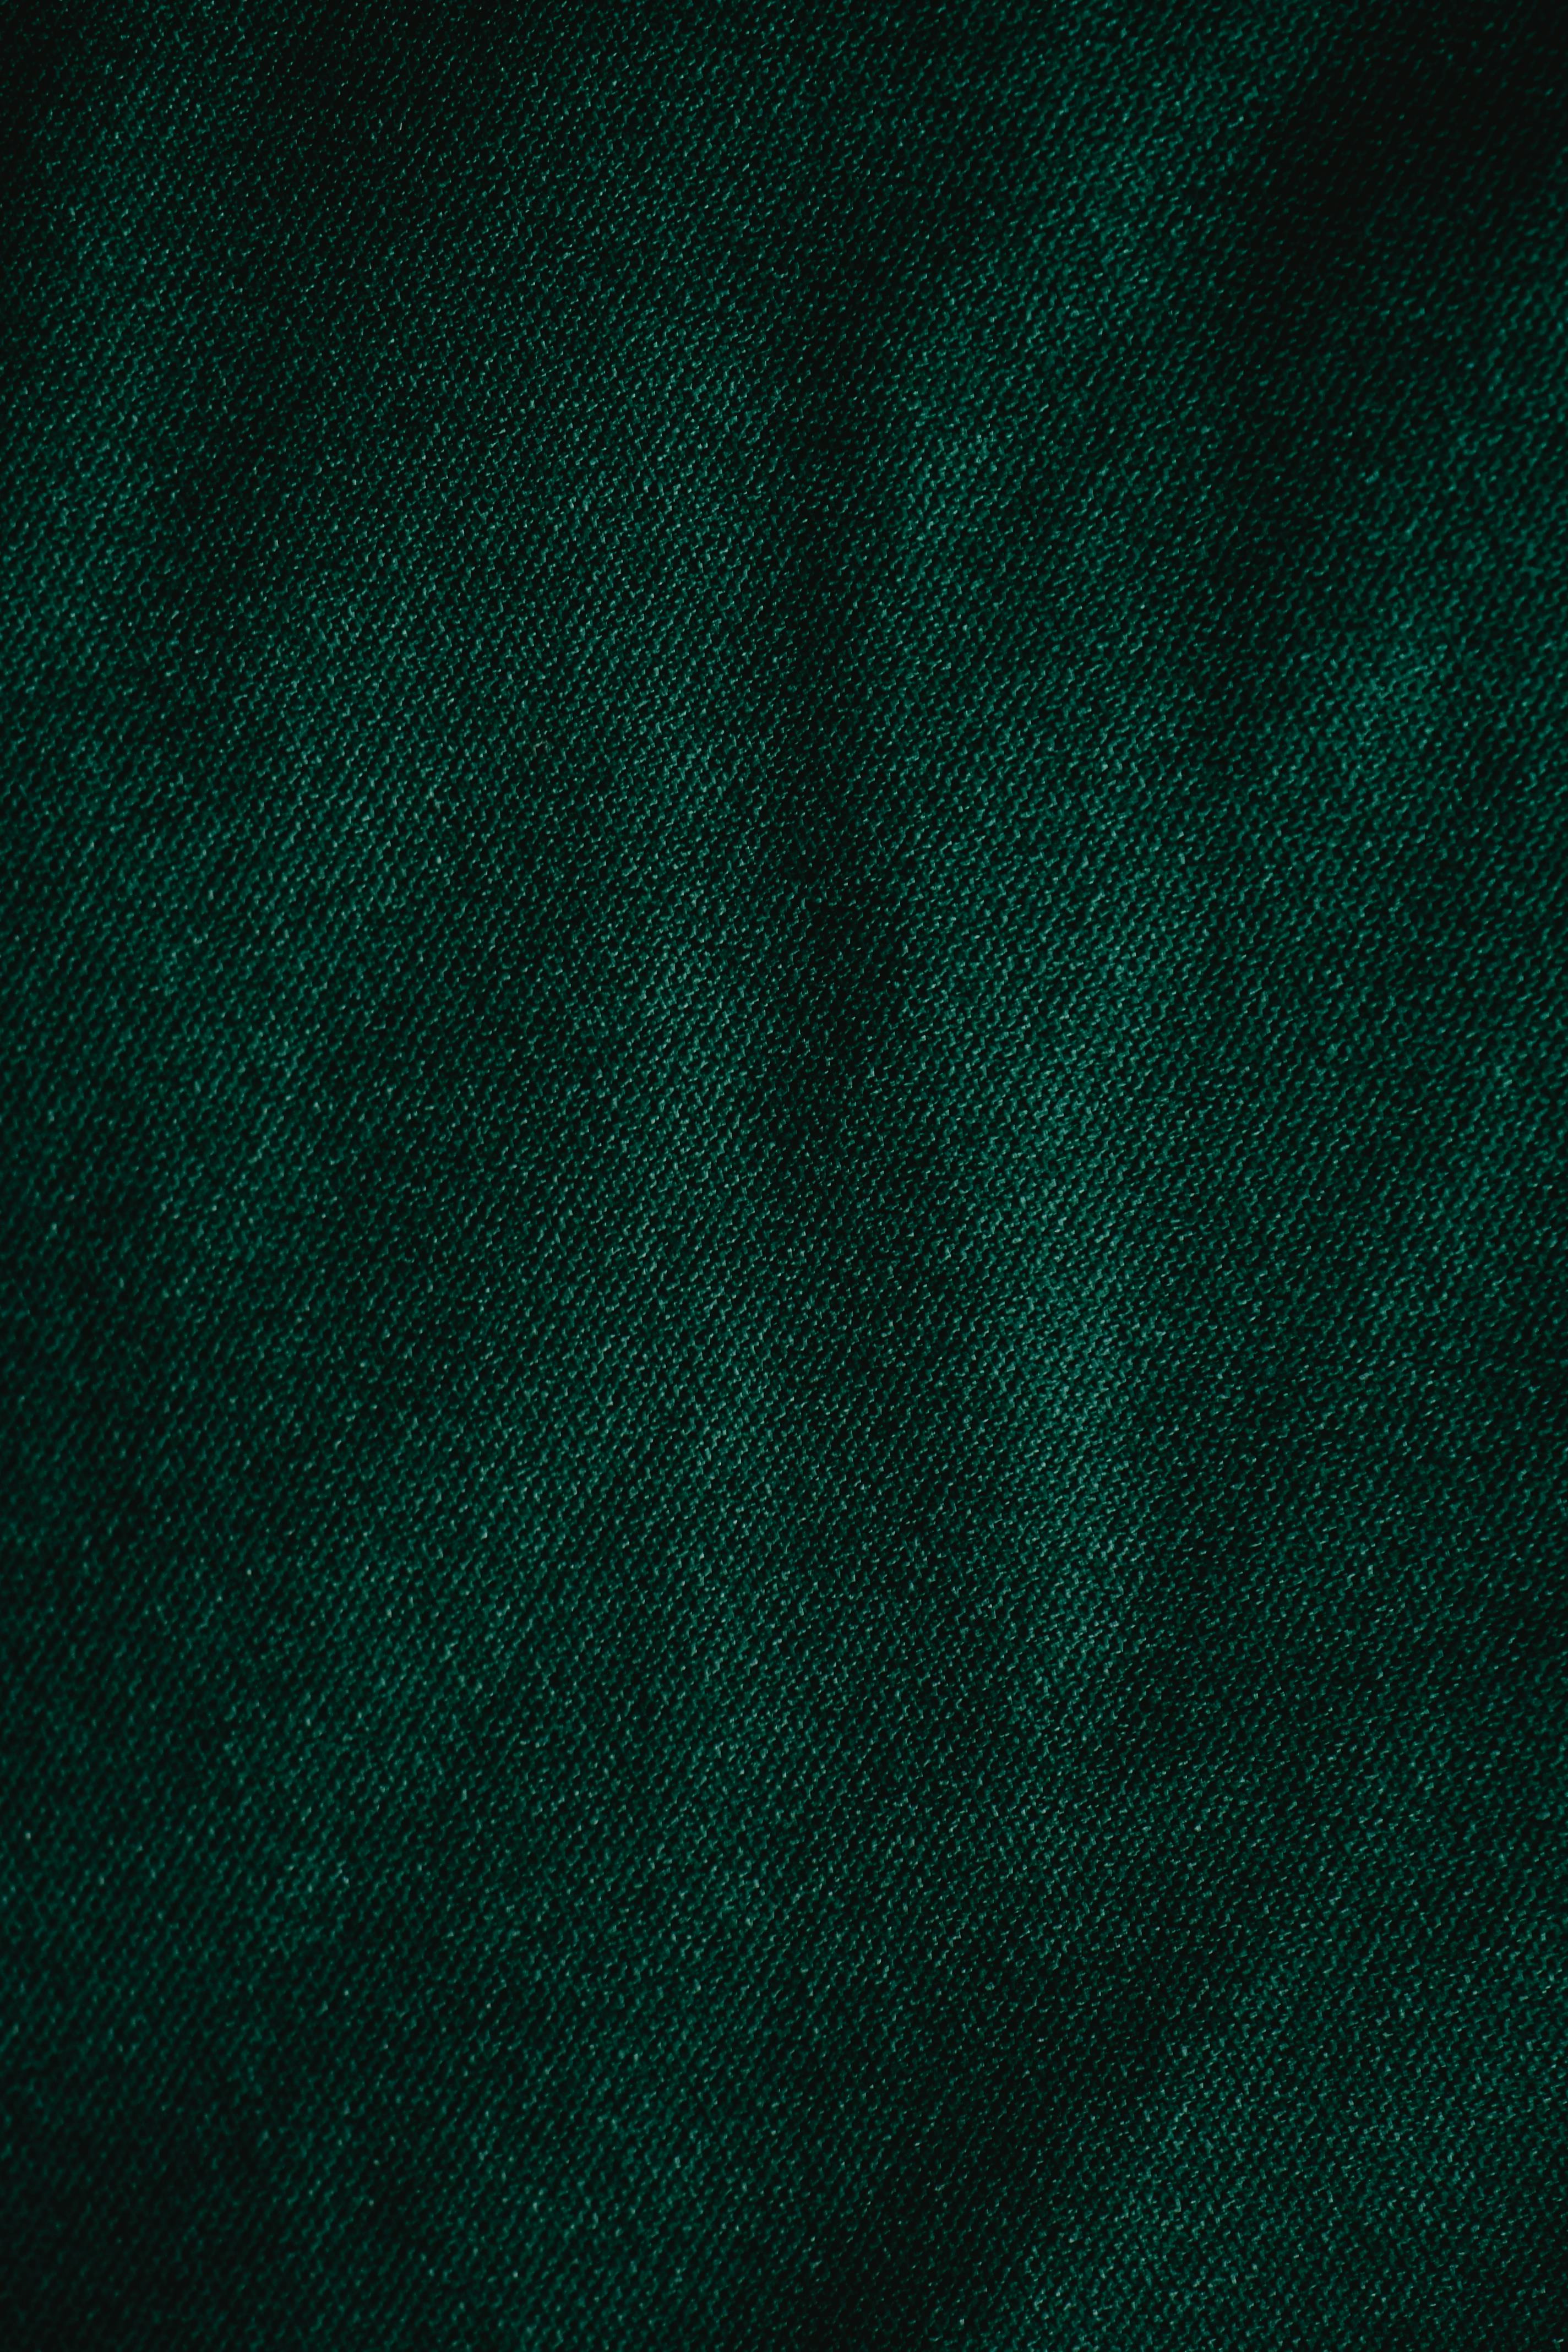 A Green Cloth in Close Up Photography · Free Stock Photo